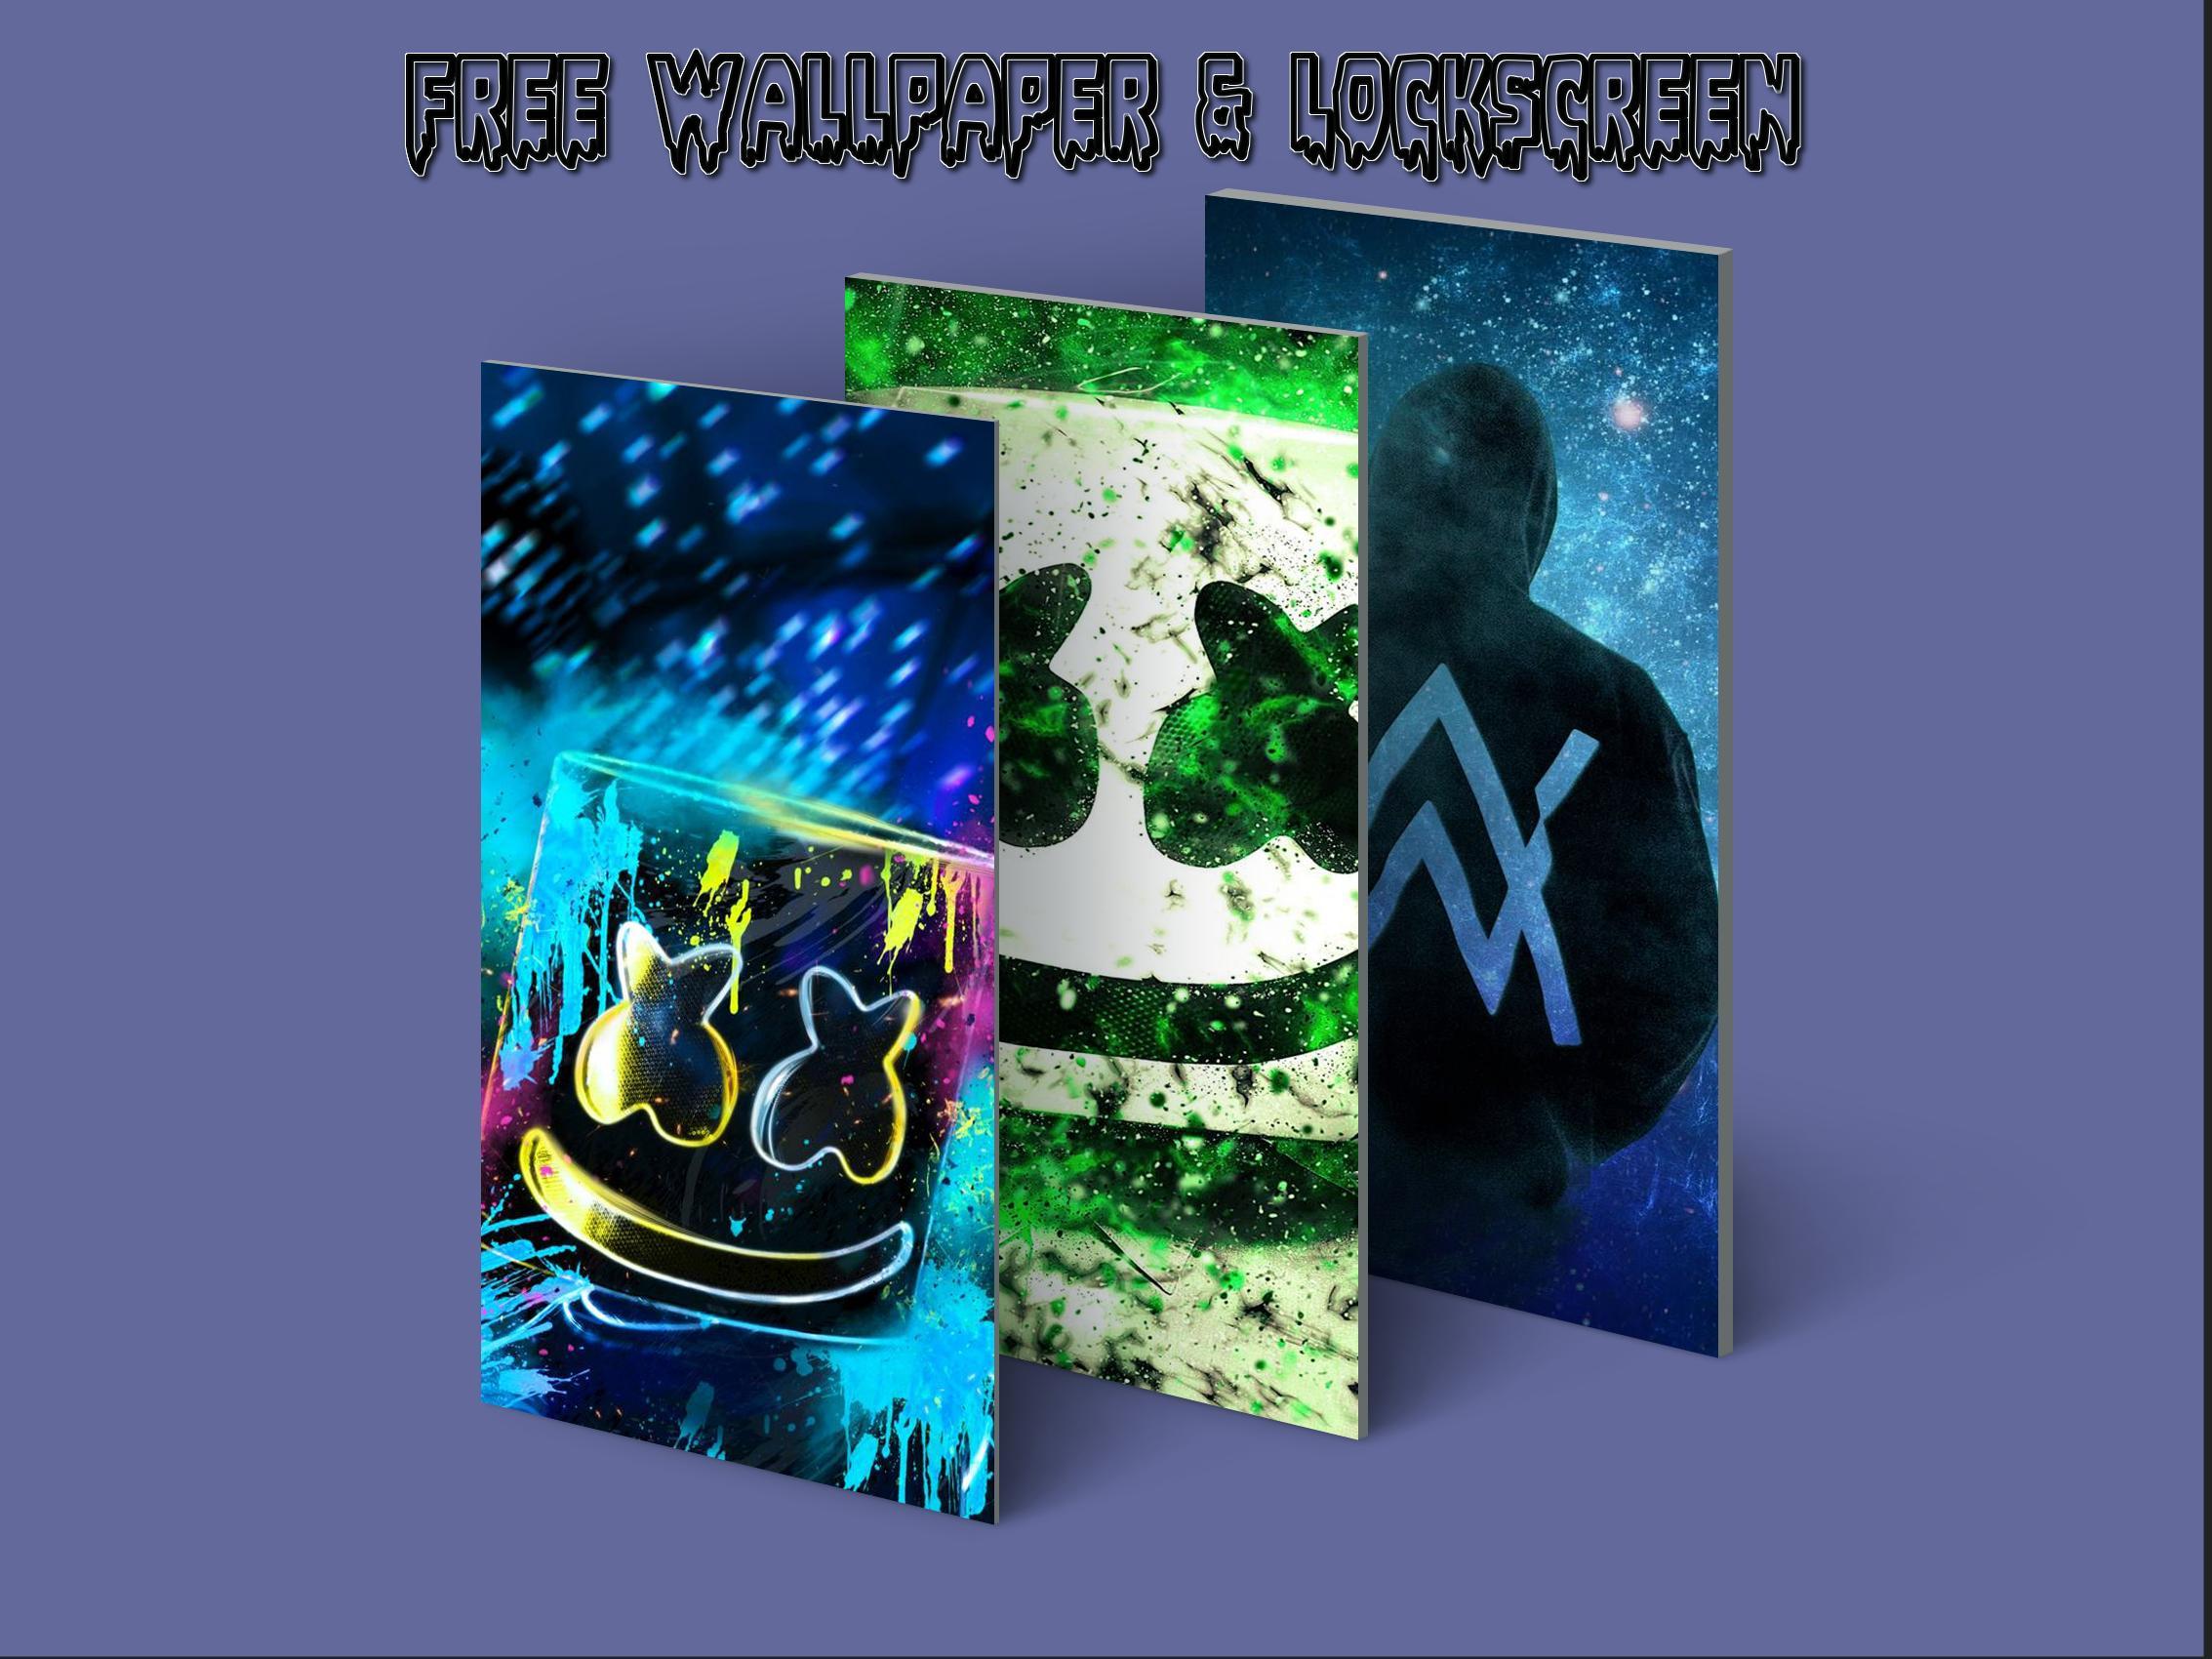 Marshmello And Alan Walker Dj Wallpaper 4K HD 2020 for Android